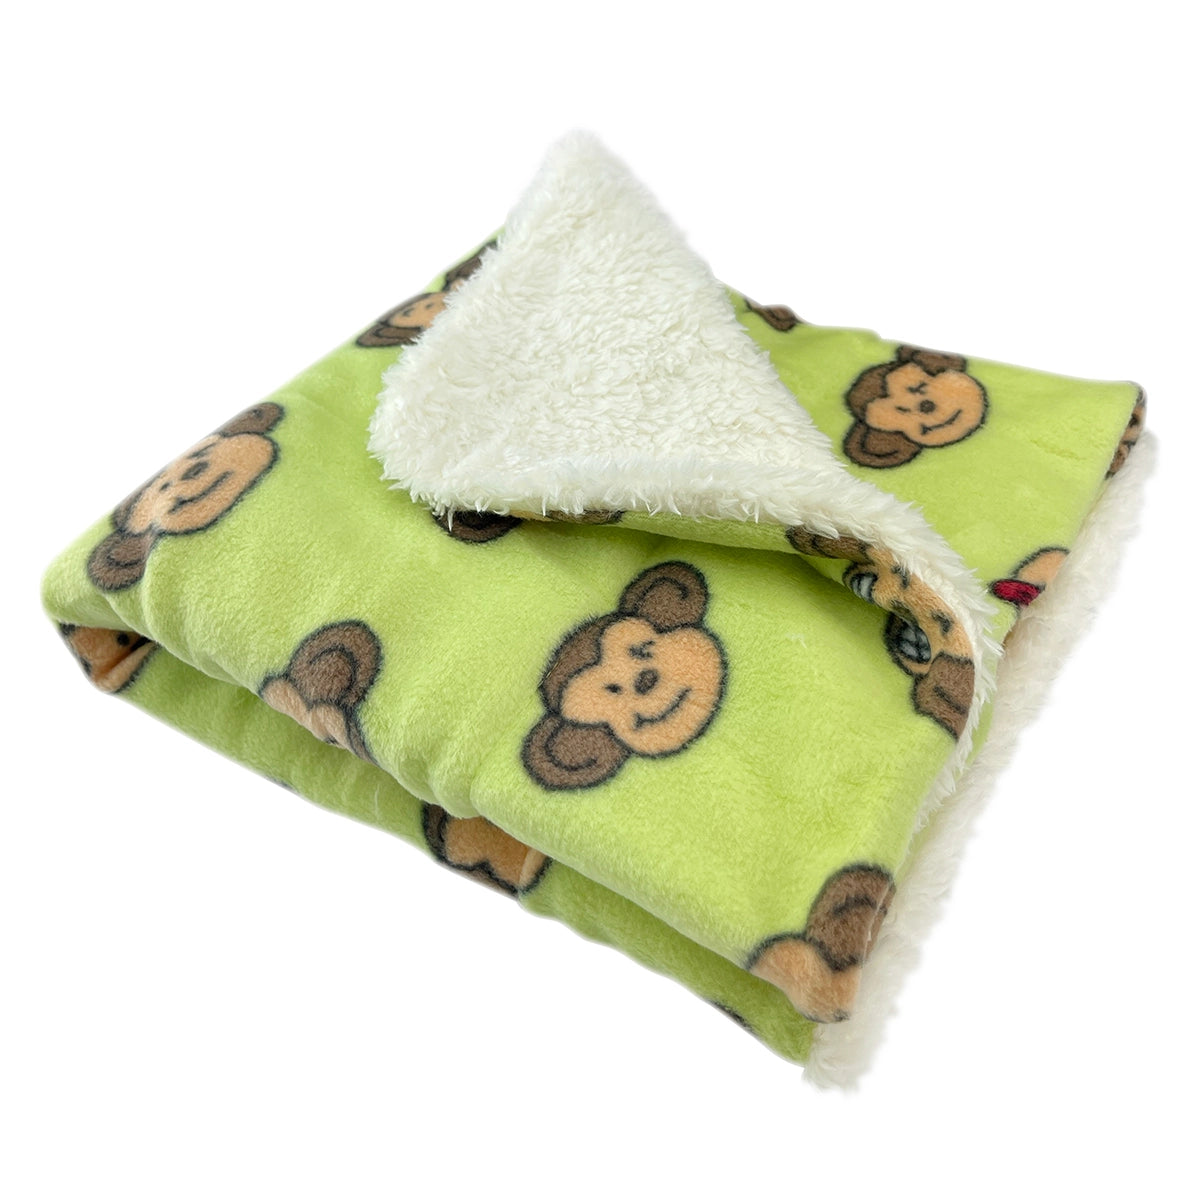 Silly Monkey Ultra Plush Blanket - 4 Colors